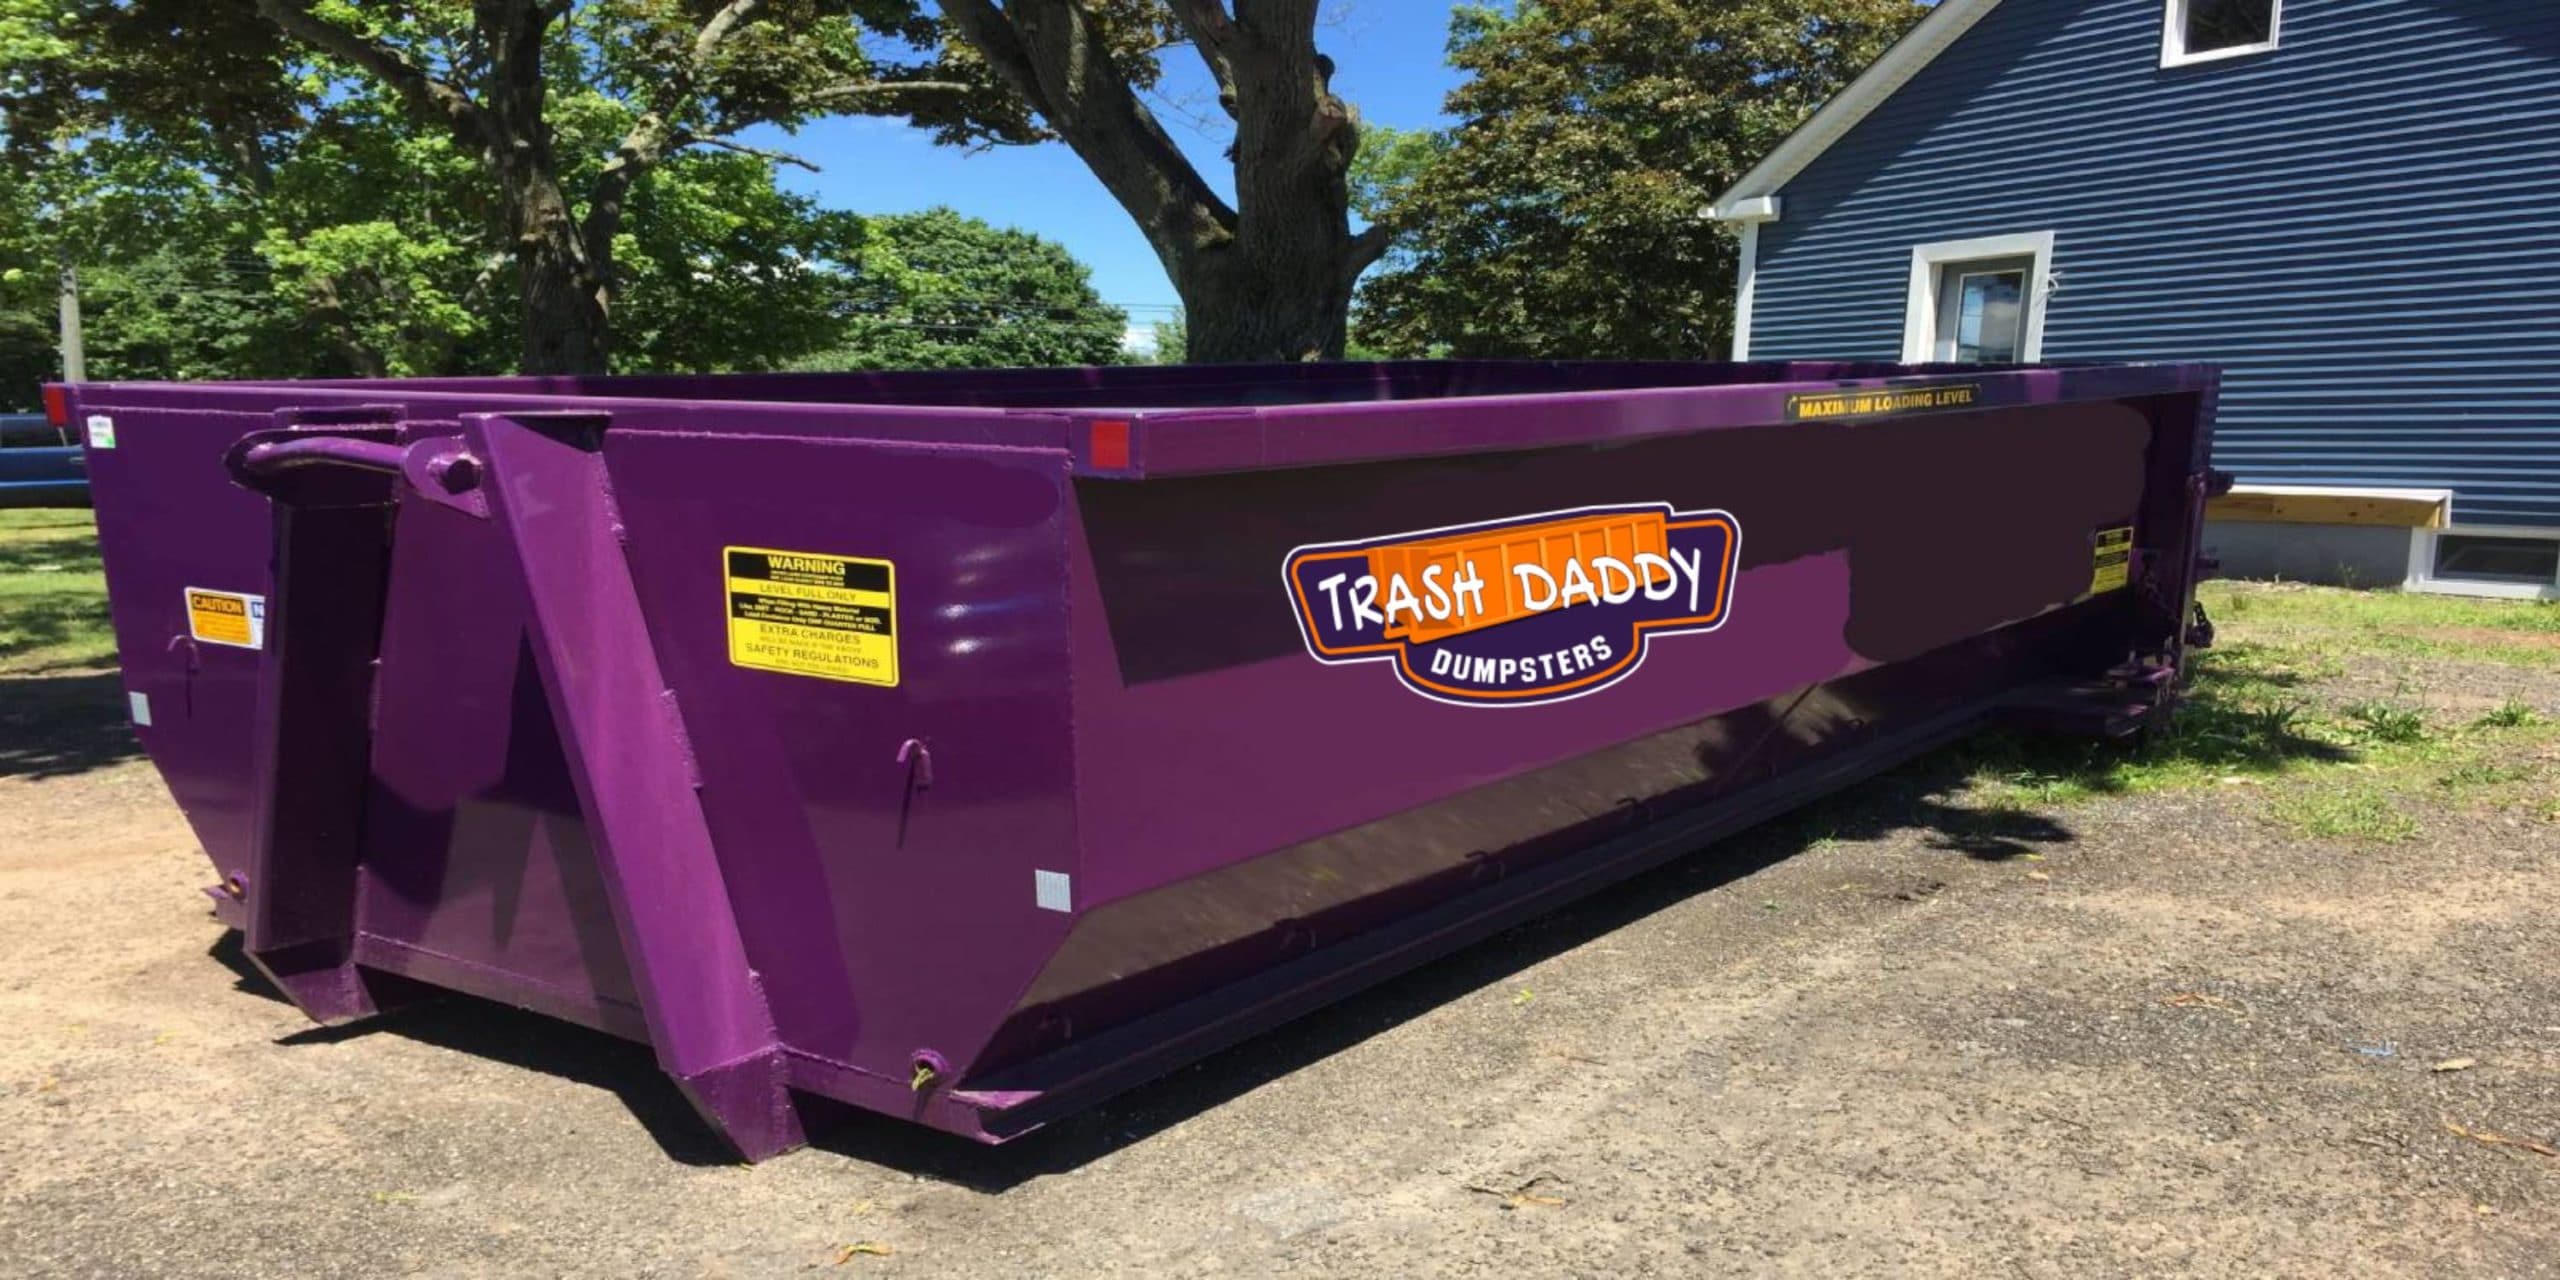 6 Reasons To Use A Commercial Dumpster At Your Next Event